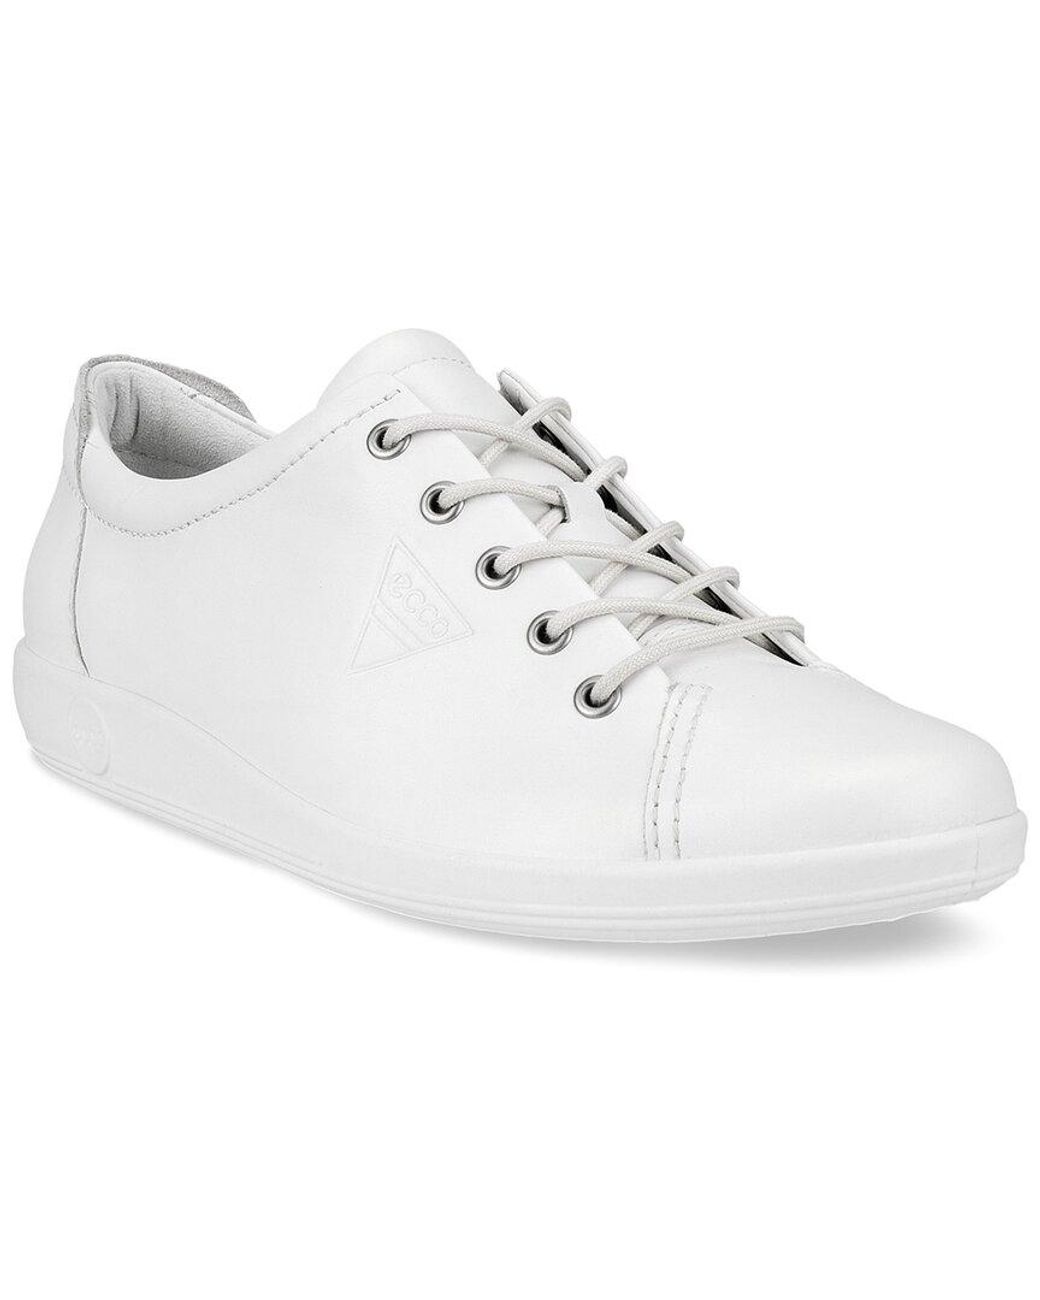 Ecco Soft 2.0 Leather Sneaker in White | Lyst